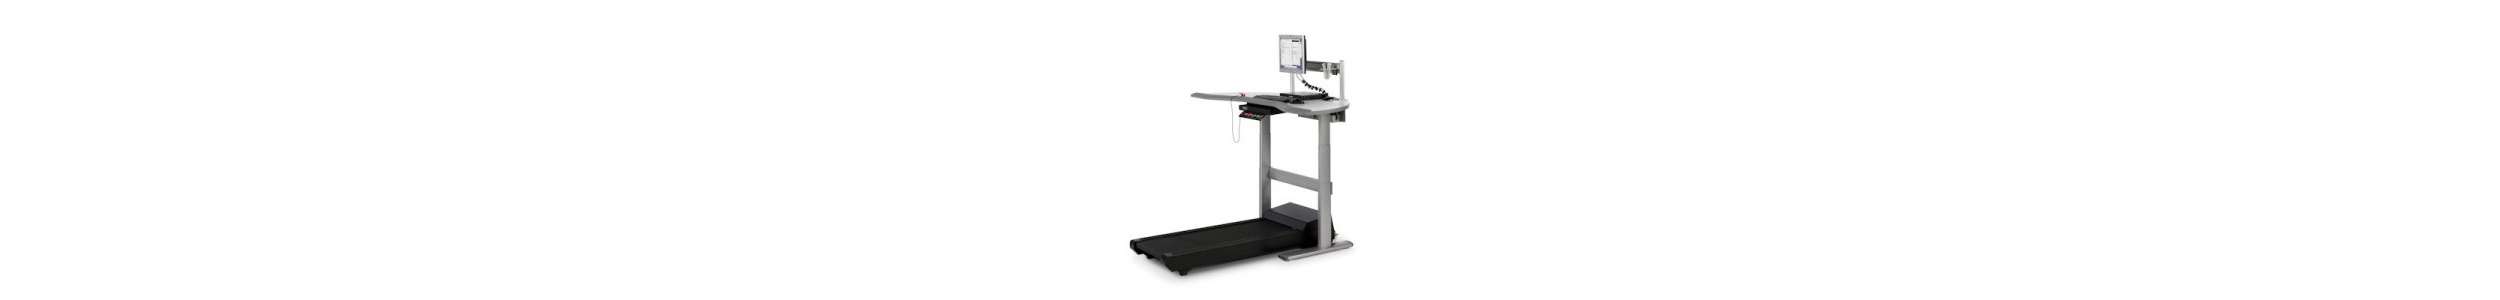 Office Trends Sit To Stand And Treadmill Desks Blog Smart